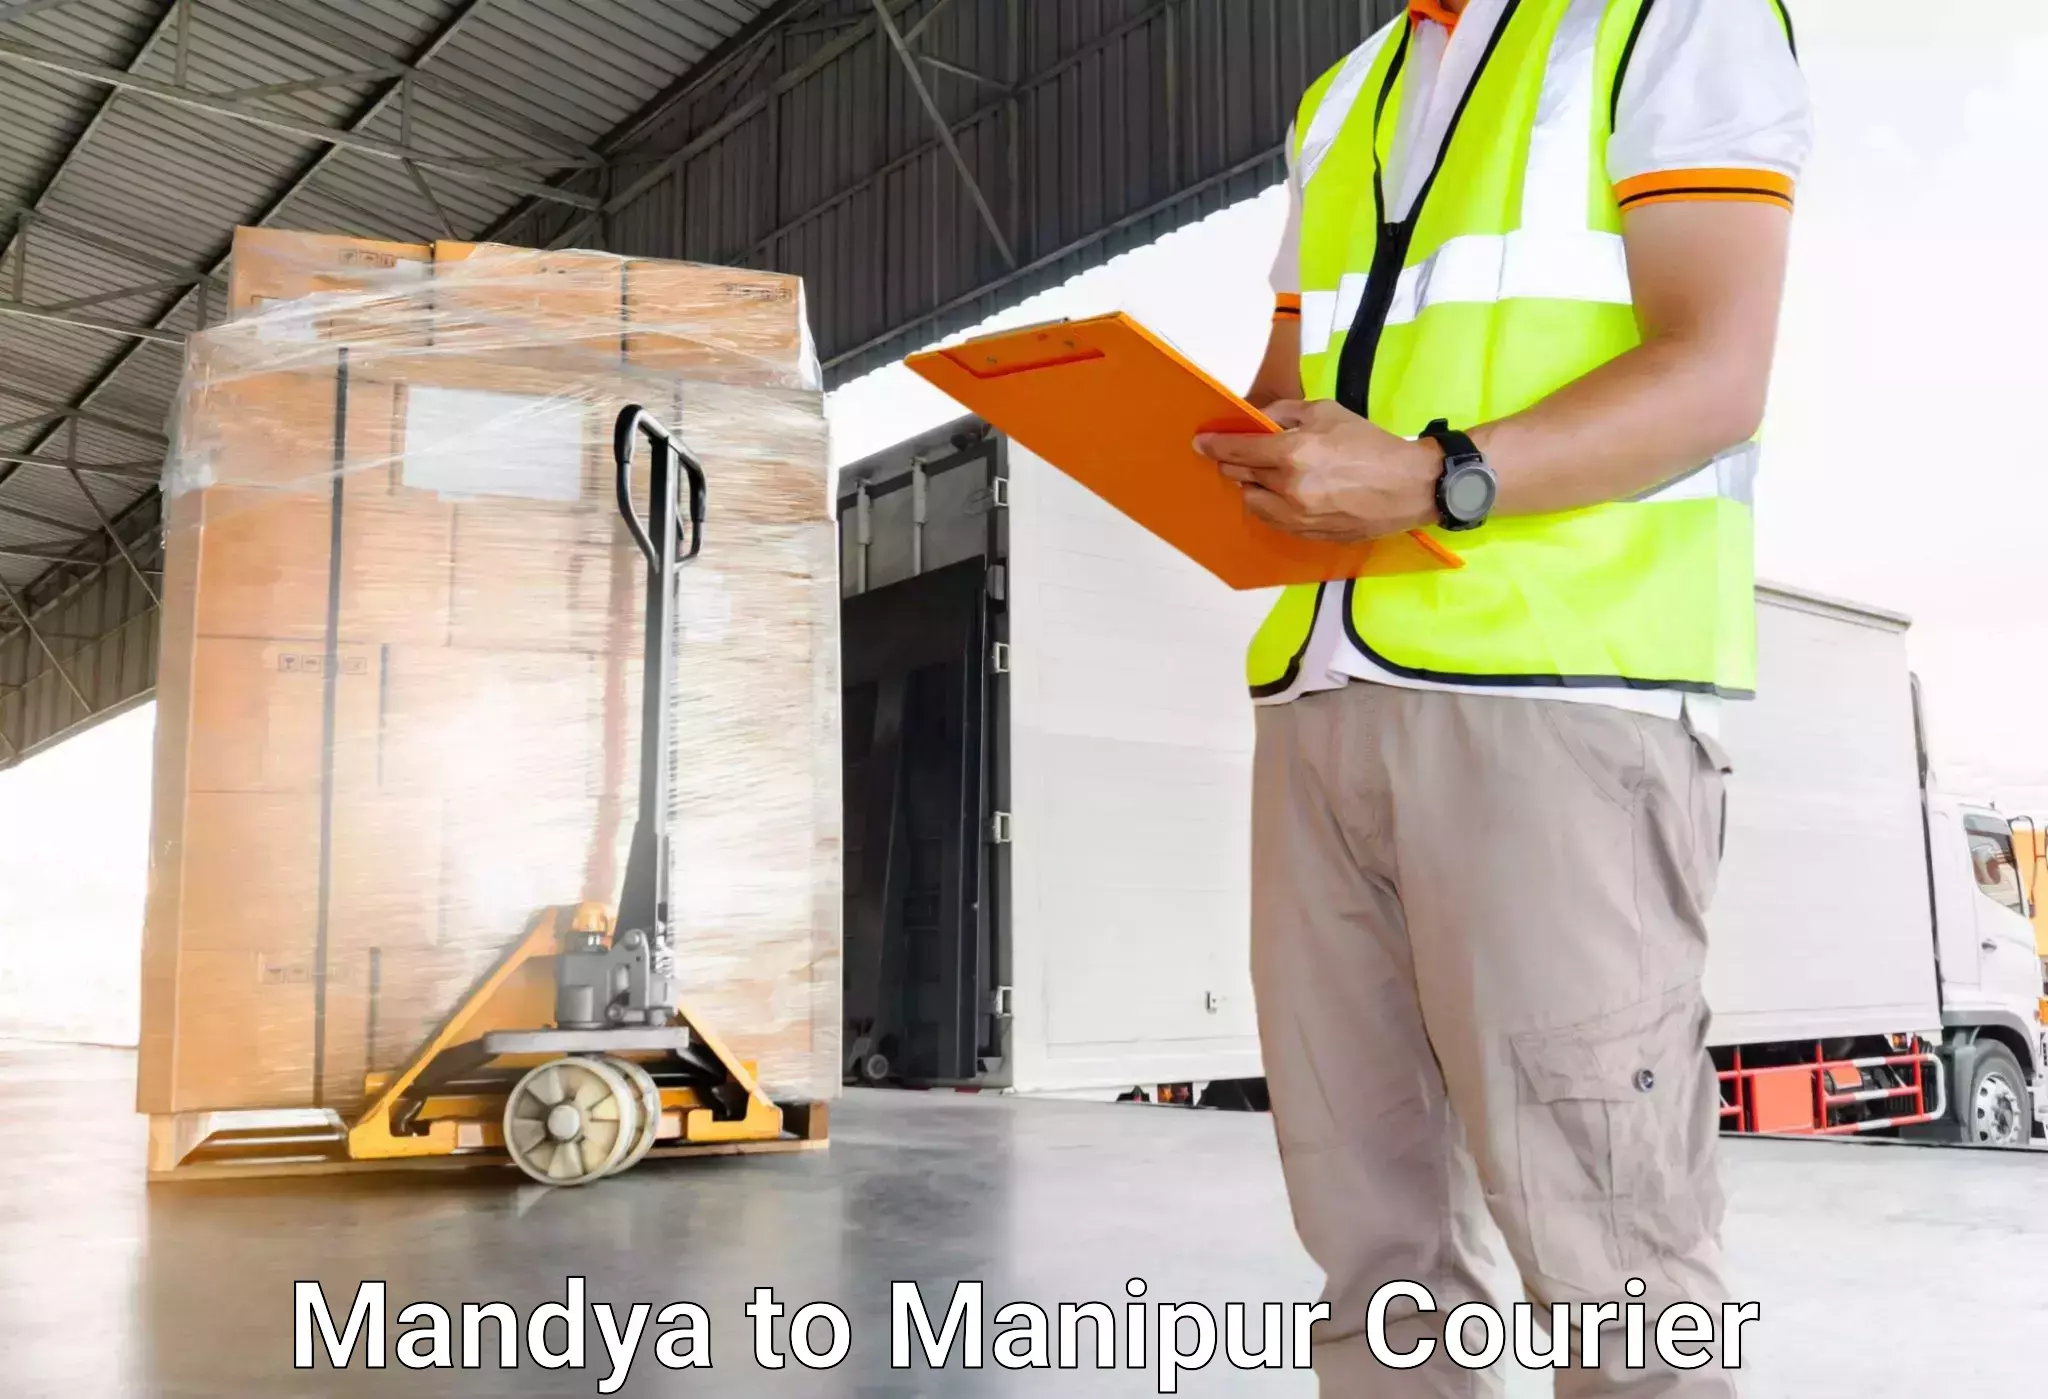 Luggage delivery app Mandya to Manipur